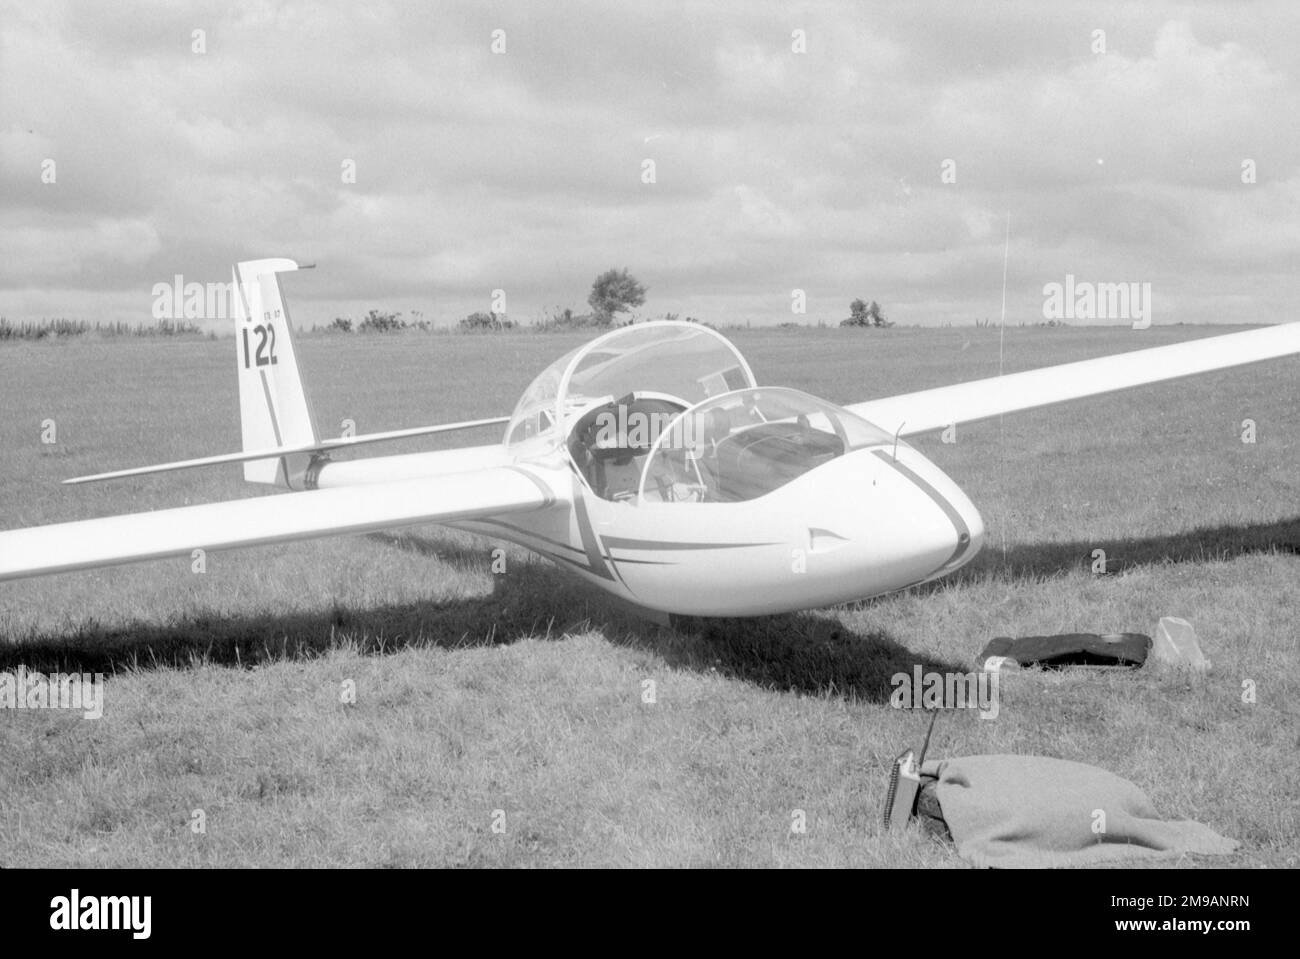 Issoire E78 Silene '122' (msn 07), at a regional gliding competition in the 1980s. Stock Photo